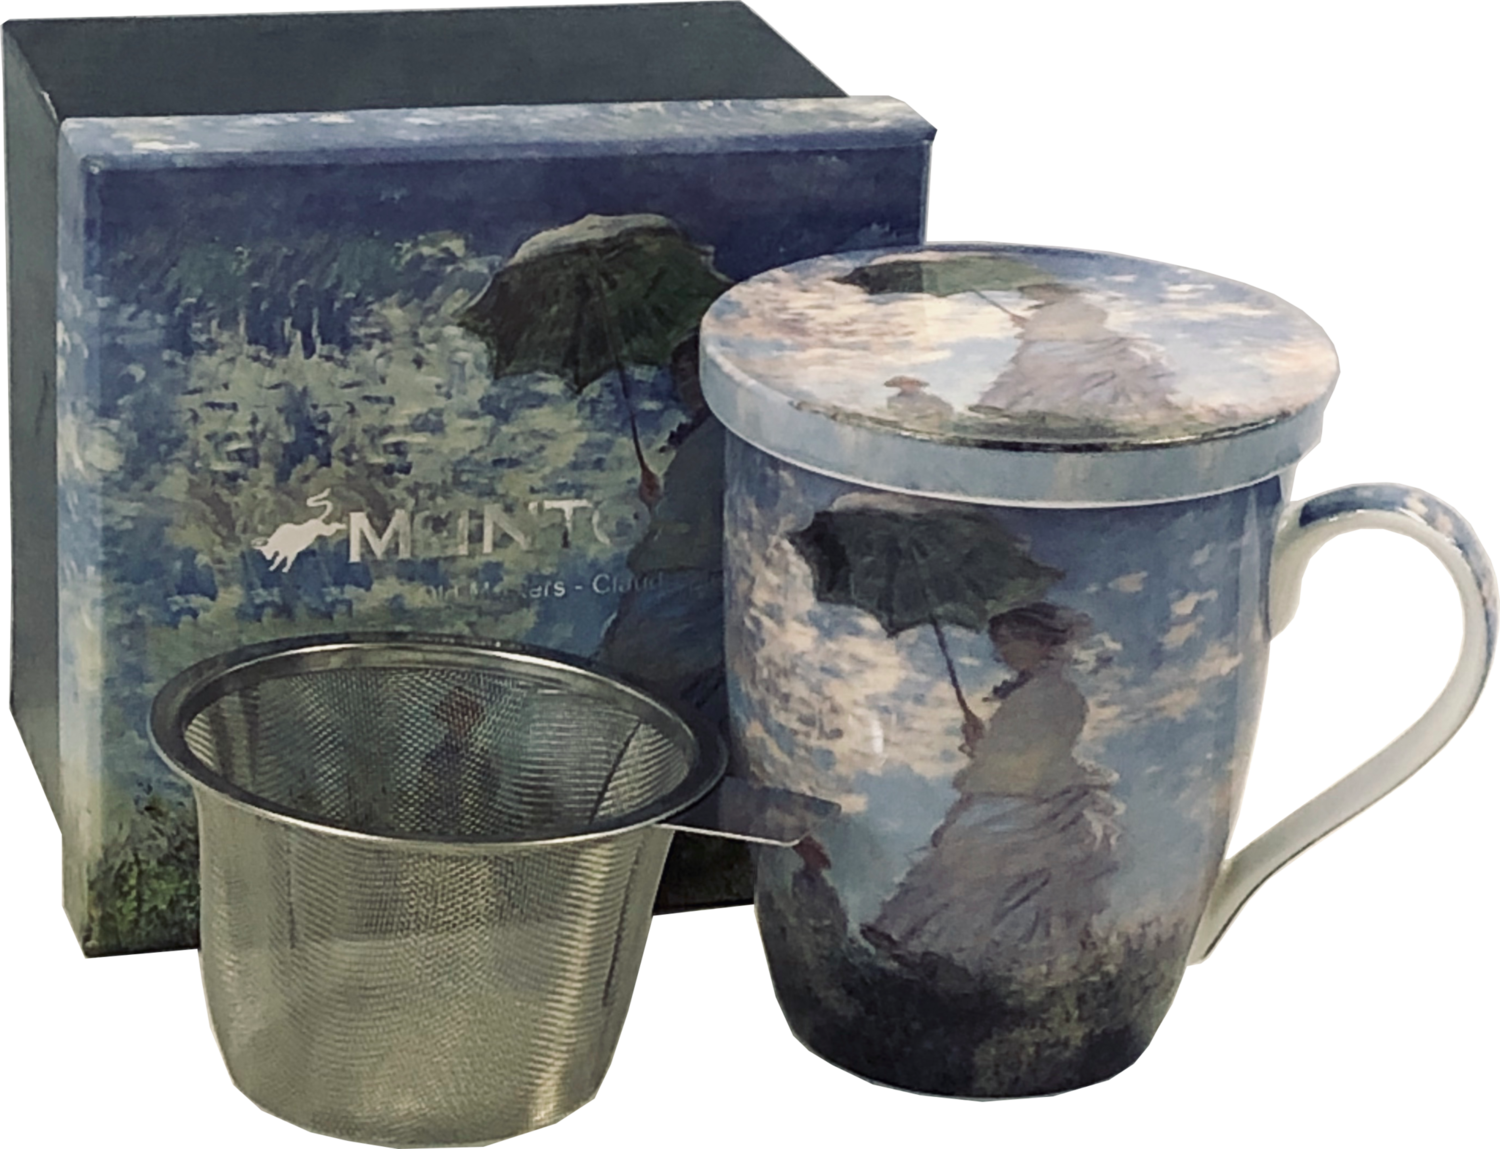 Monet - Woman with a Parasol - Single Fine Bone China Tea Mug/Cup in Collector Box - with Lid and Strainer